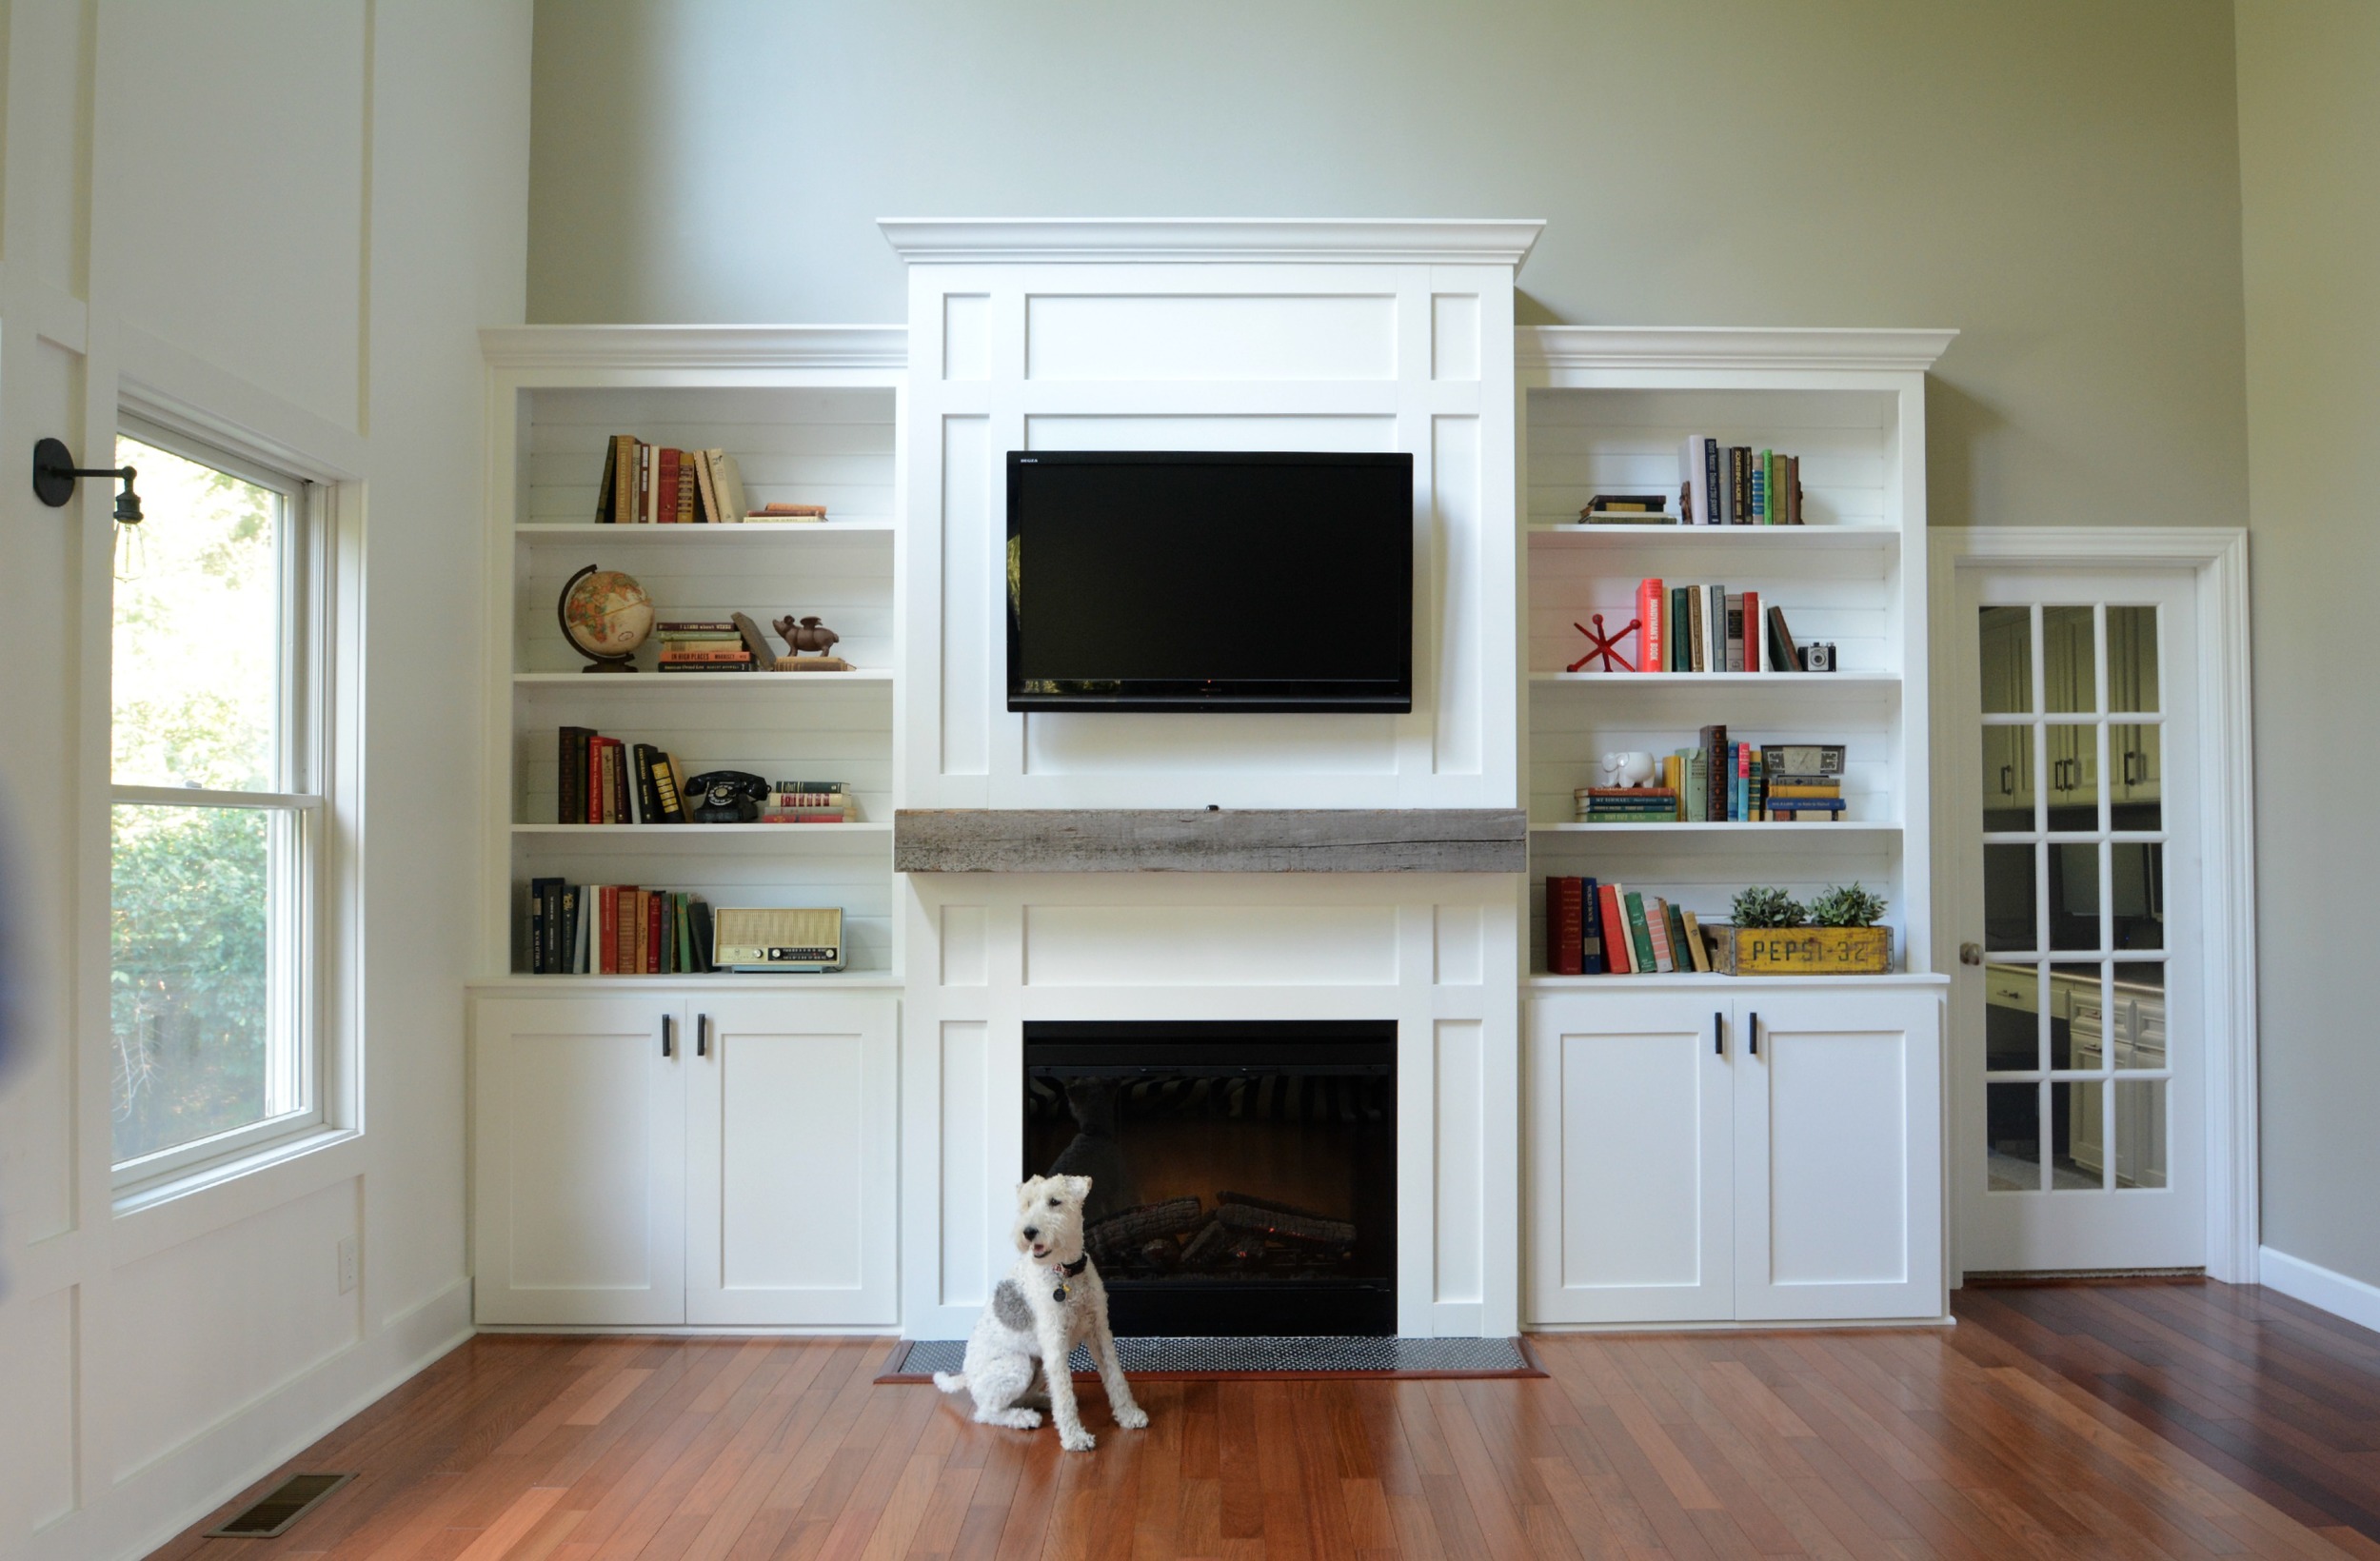 Living Room Built-Ins Tutorial + Cost — Decor and the Dog